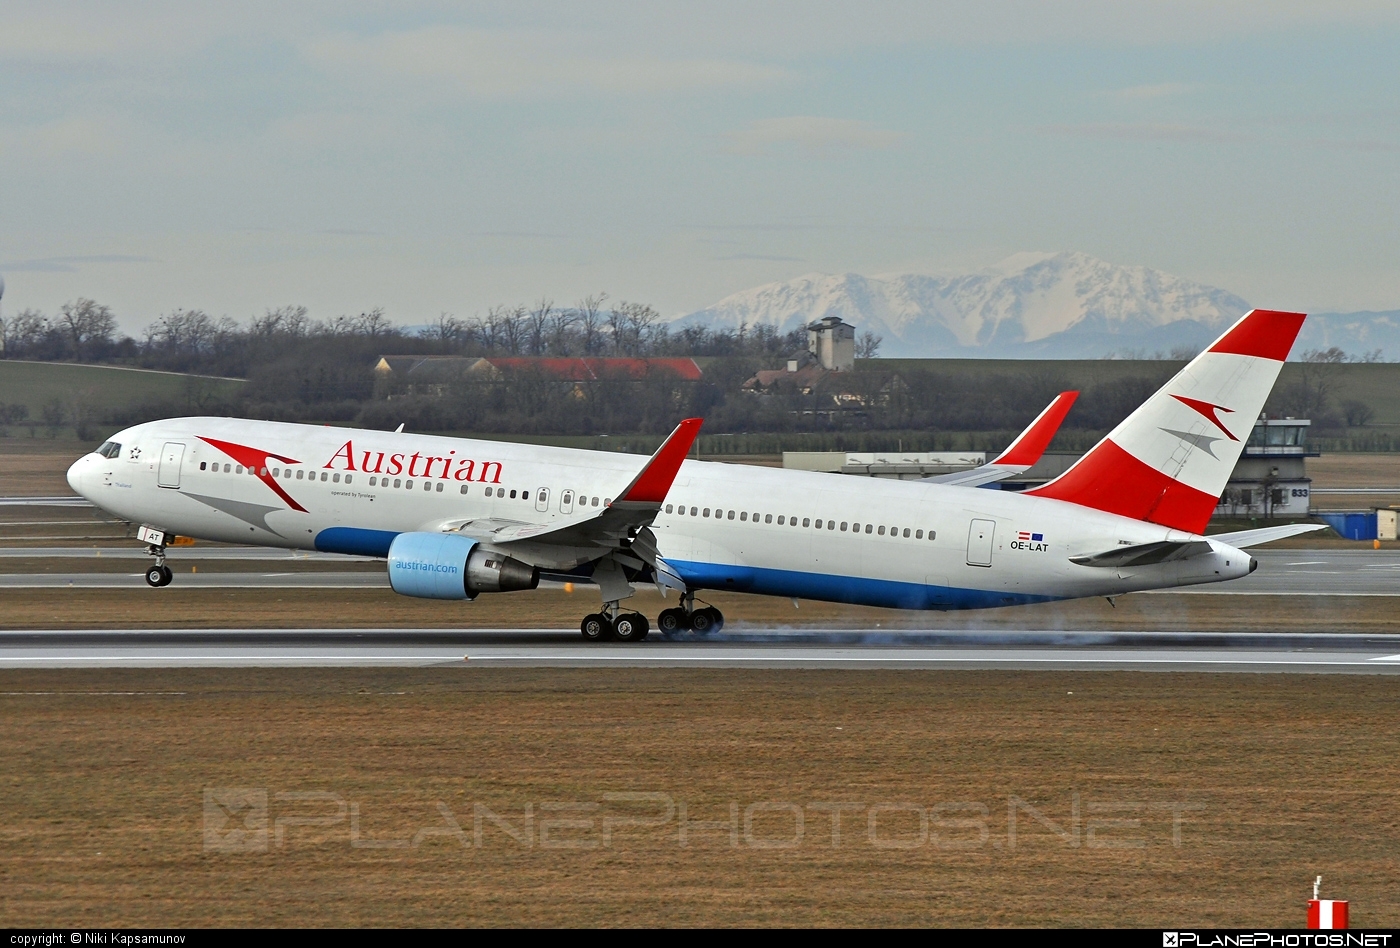 Boeing 767-300ER - OE-LAT operated by Austrian Airlines #austrian #austrianAirlines #b767 #b767er #boeing #boeing767